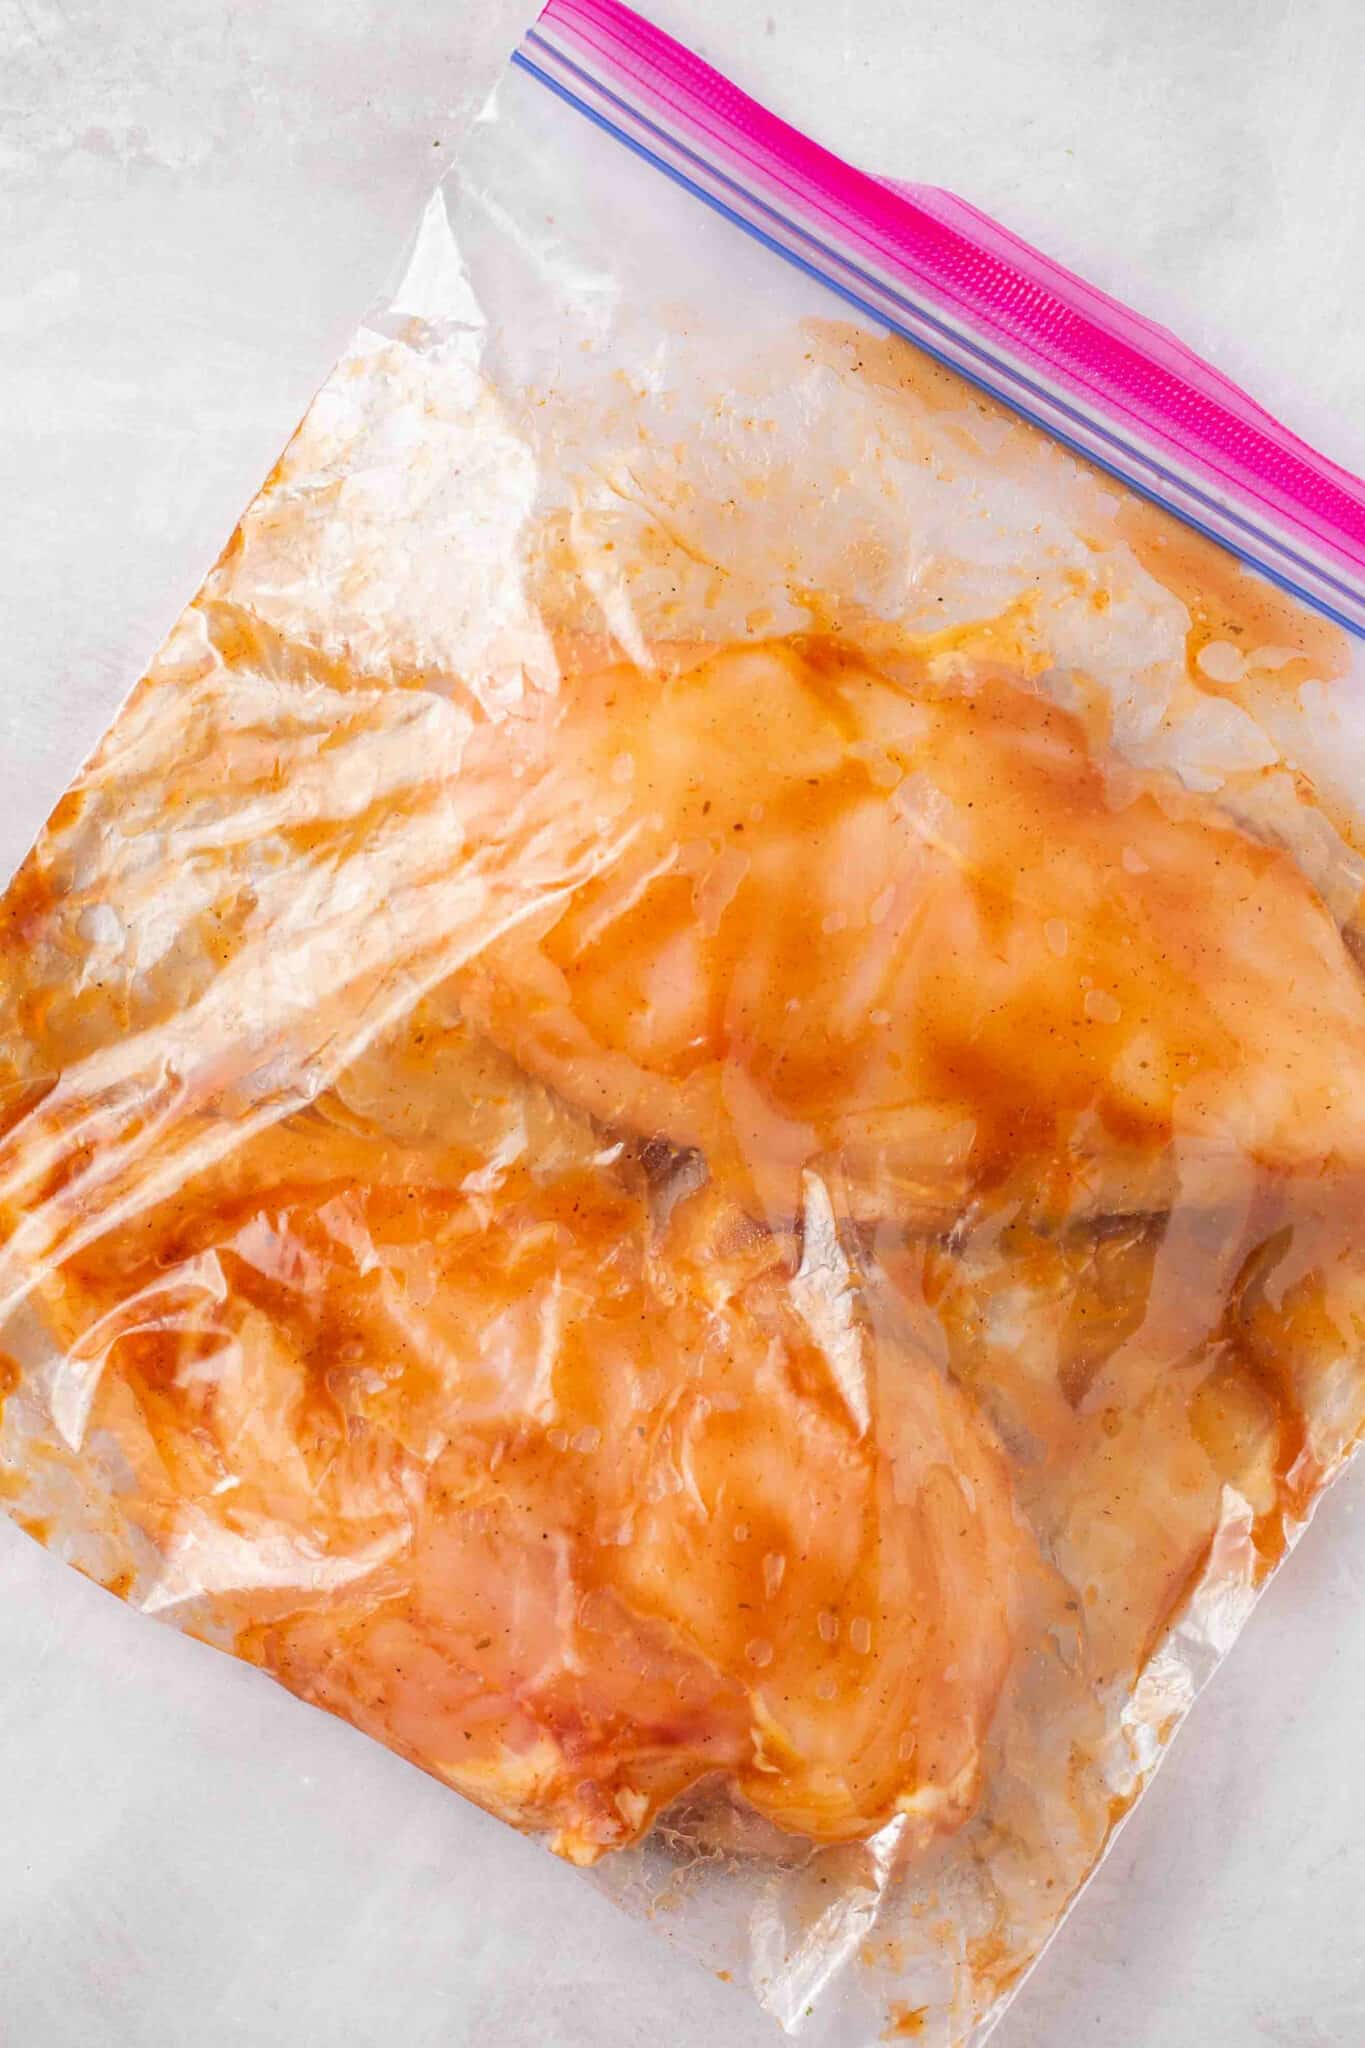 Marinating two chicken breasts in a bag.